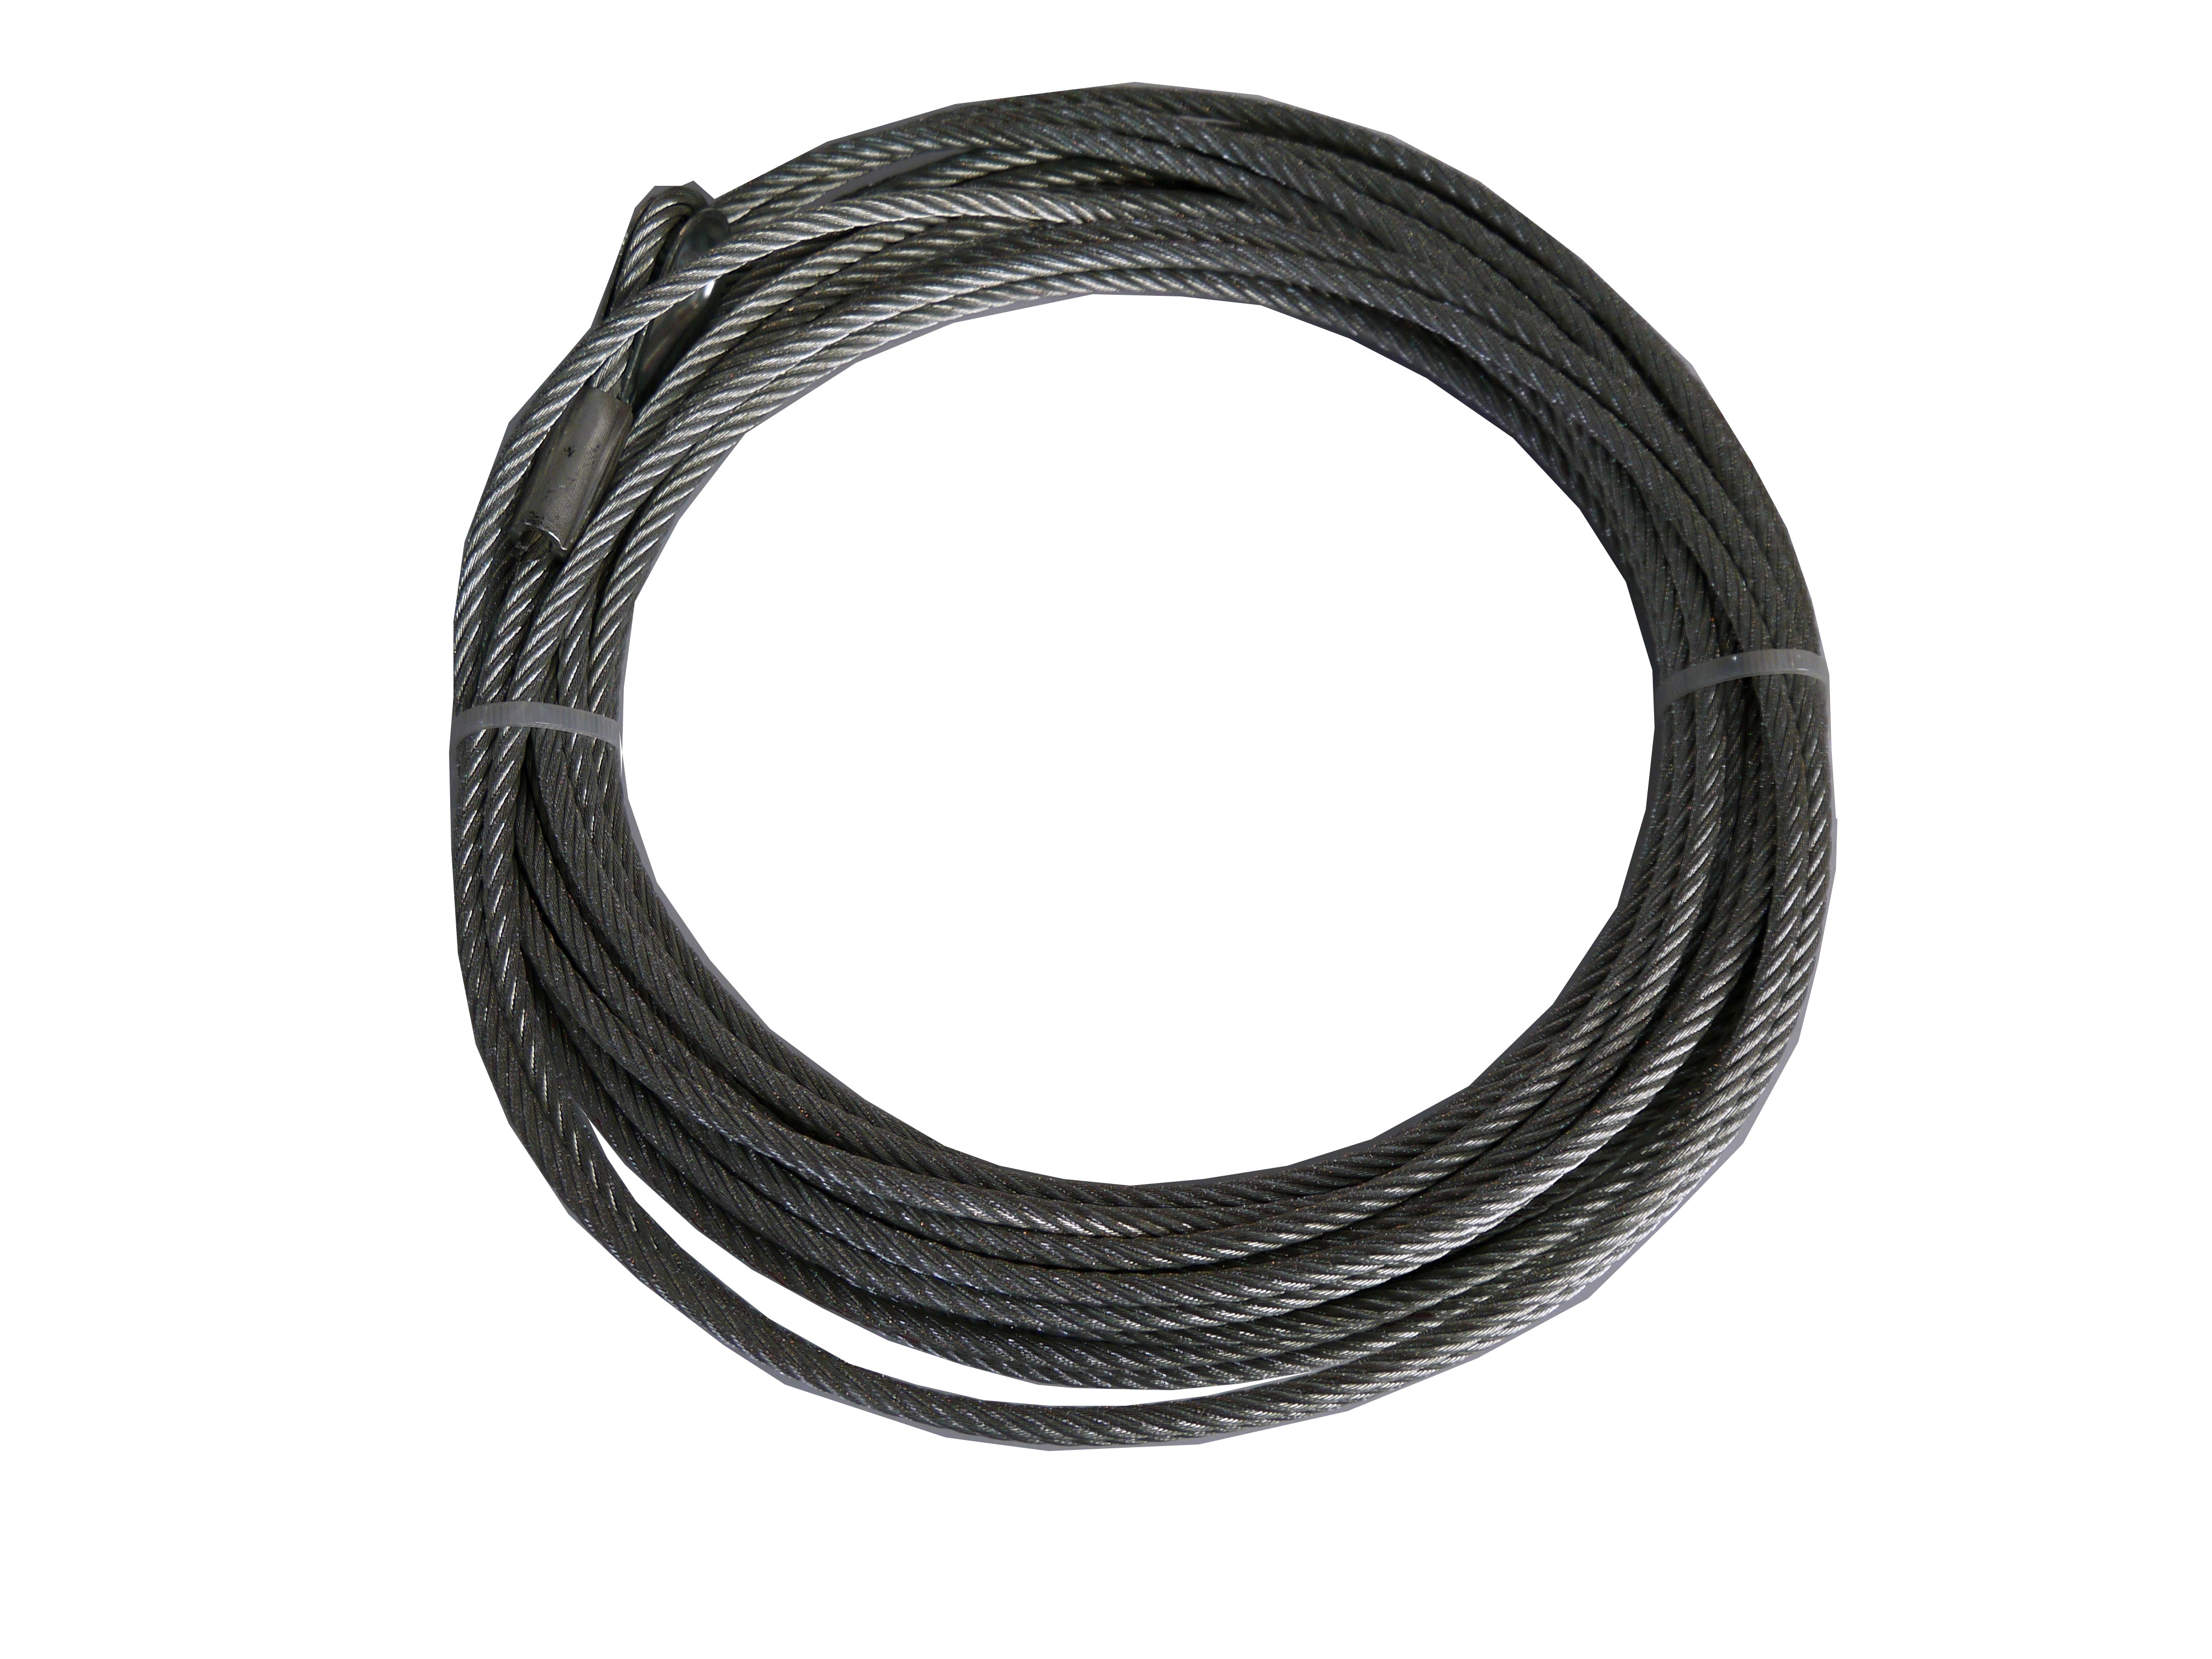 4500 Pound Capacity 15/64 Inch Diameter X 40 Foot Length Steel Cable